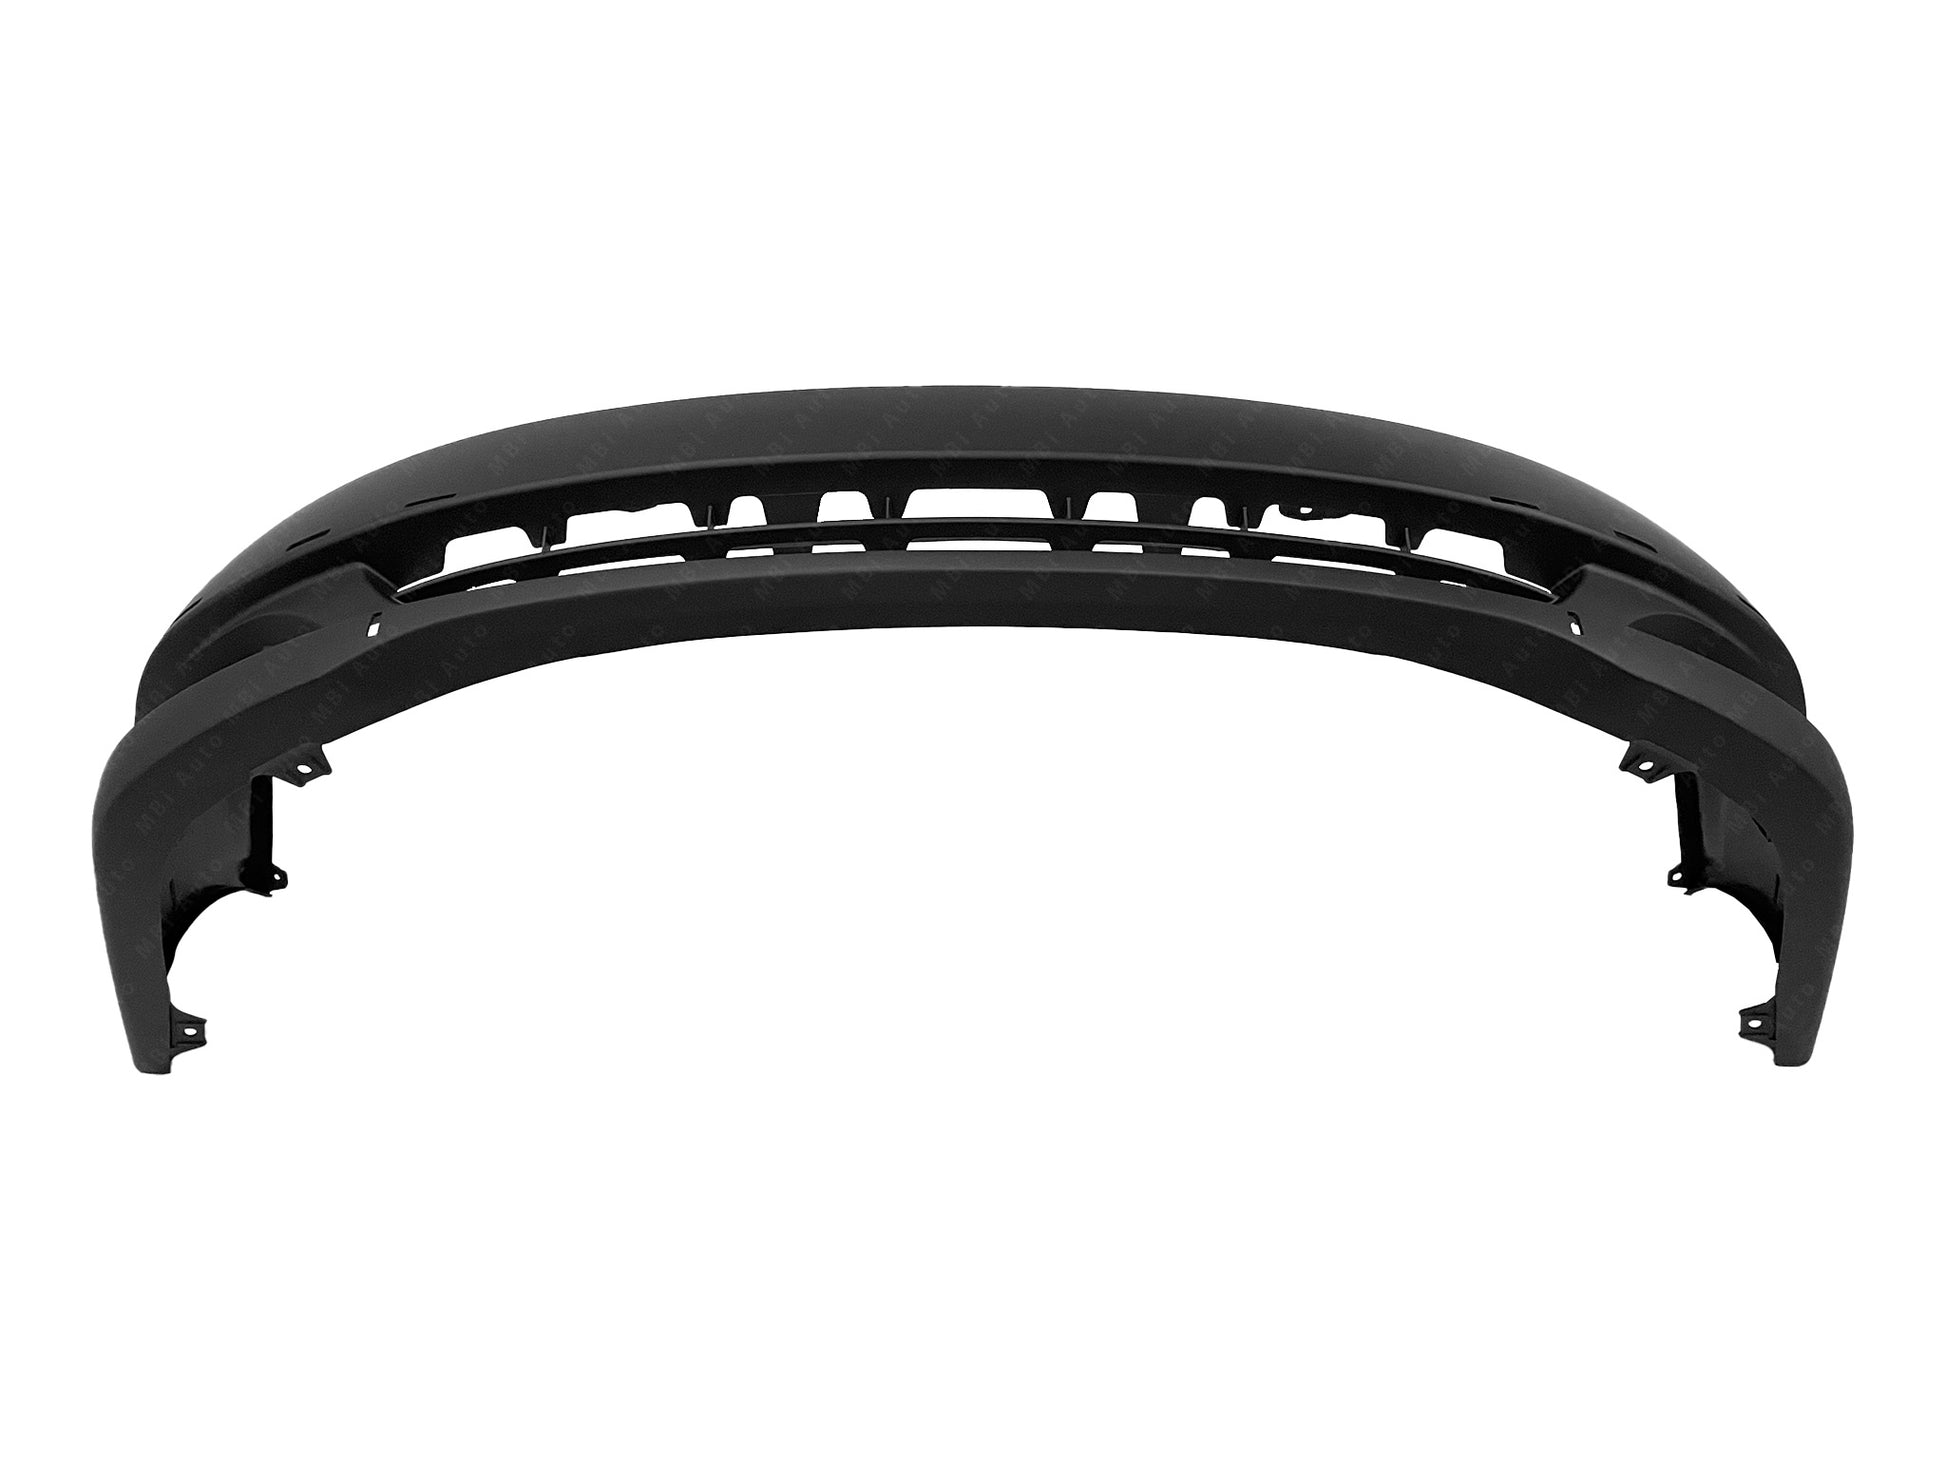 Toyota Corolla 2005 - 2008 Front Bumper Cover 05 - 08 TO1000298 Bumper-King